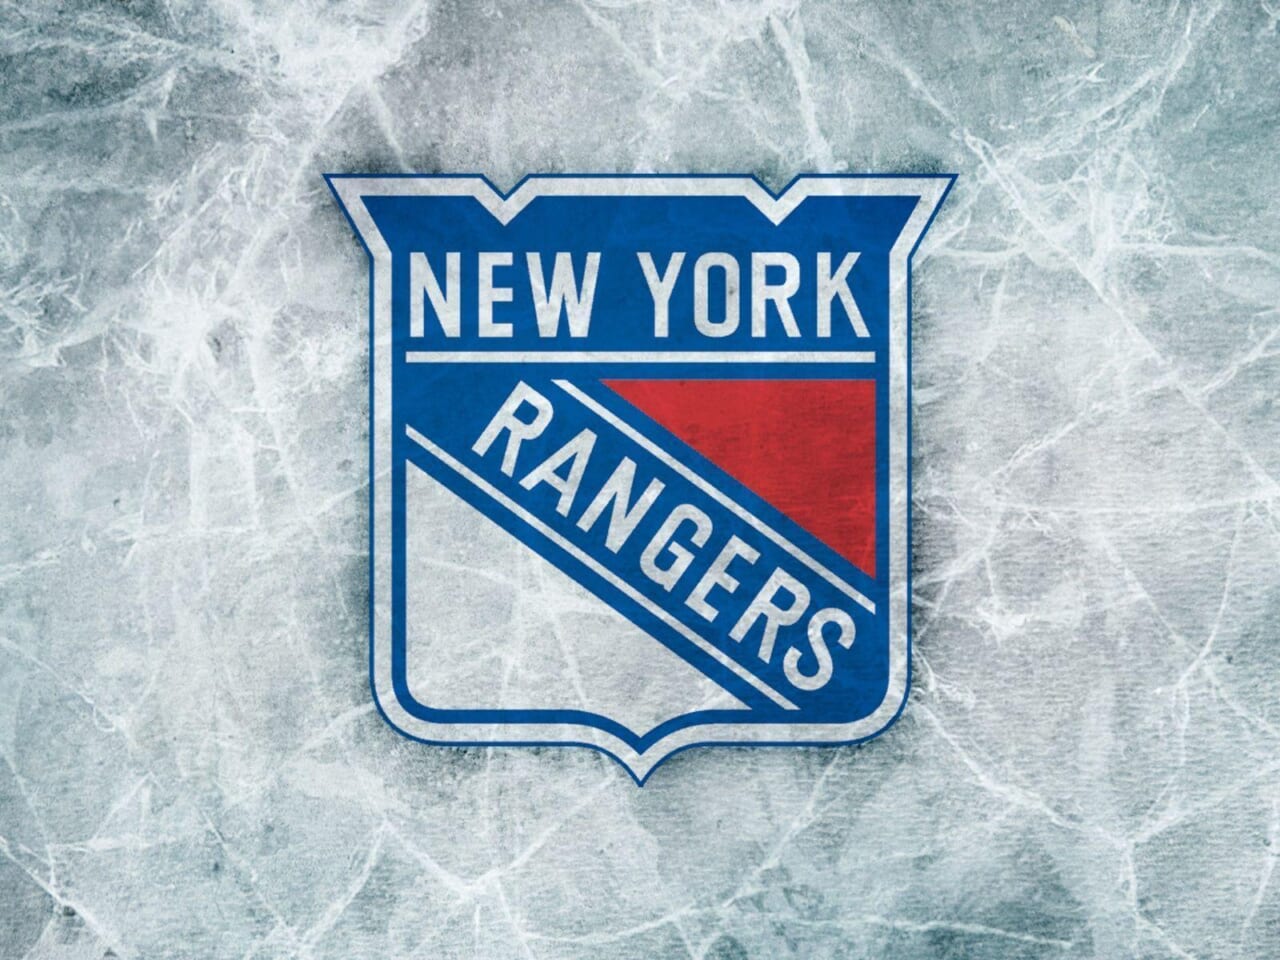 The NHL releases the New York Rangers schedule for 2020-21